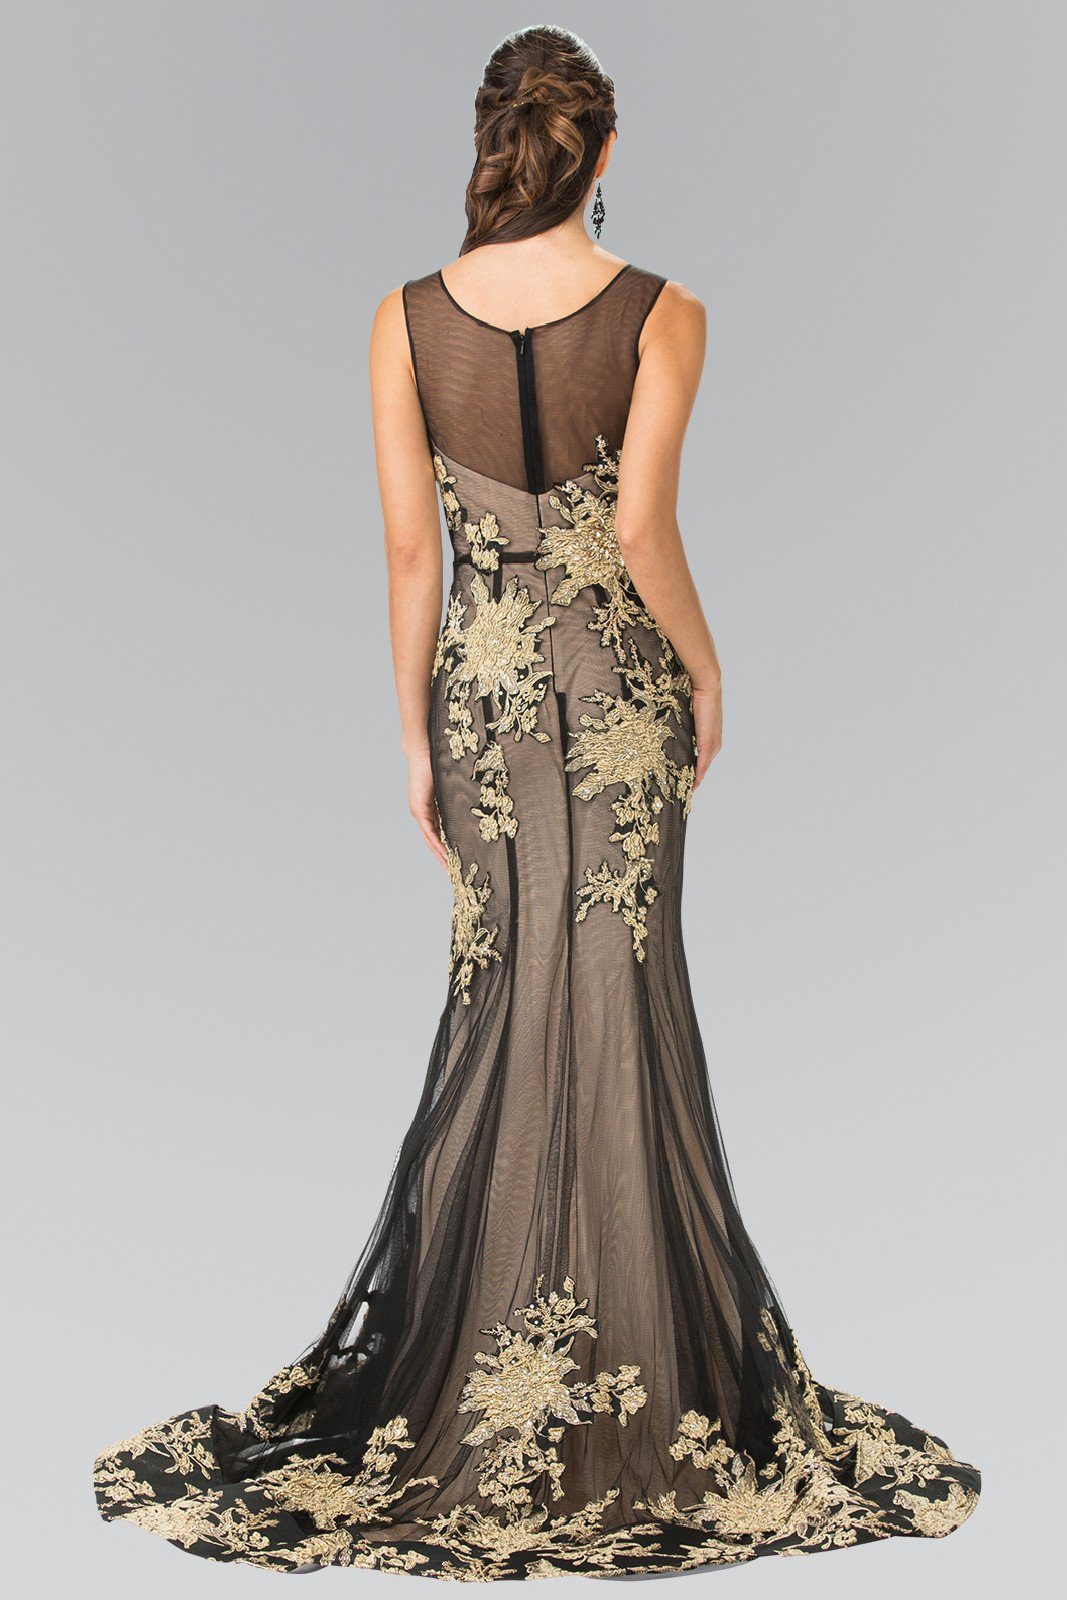 Long Illusion Mermaid Gown with Embroidery by Elizabeth K GL2335-Long Formal Dresses-ABC Fashion